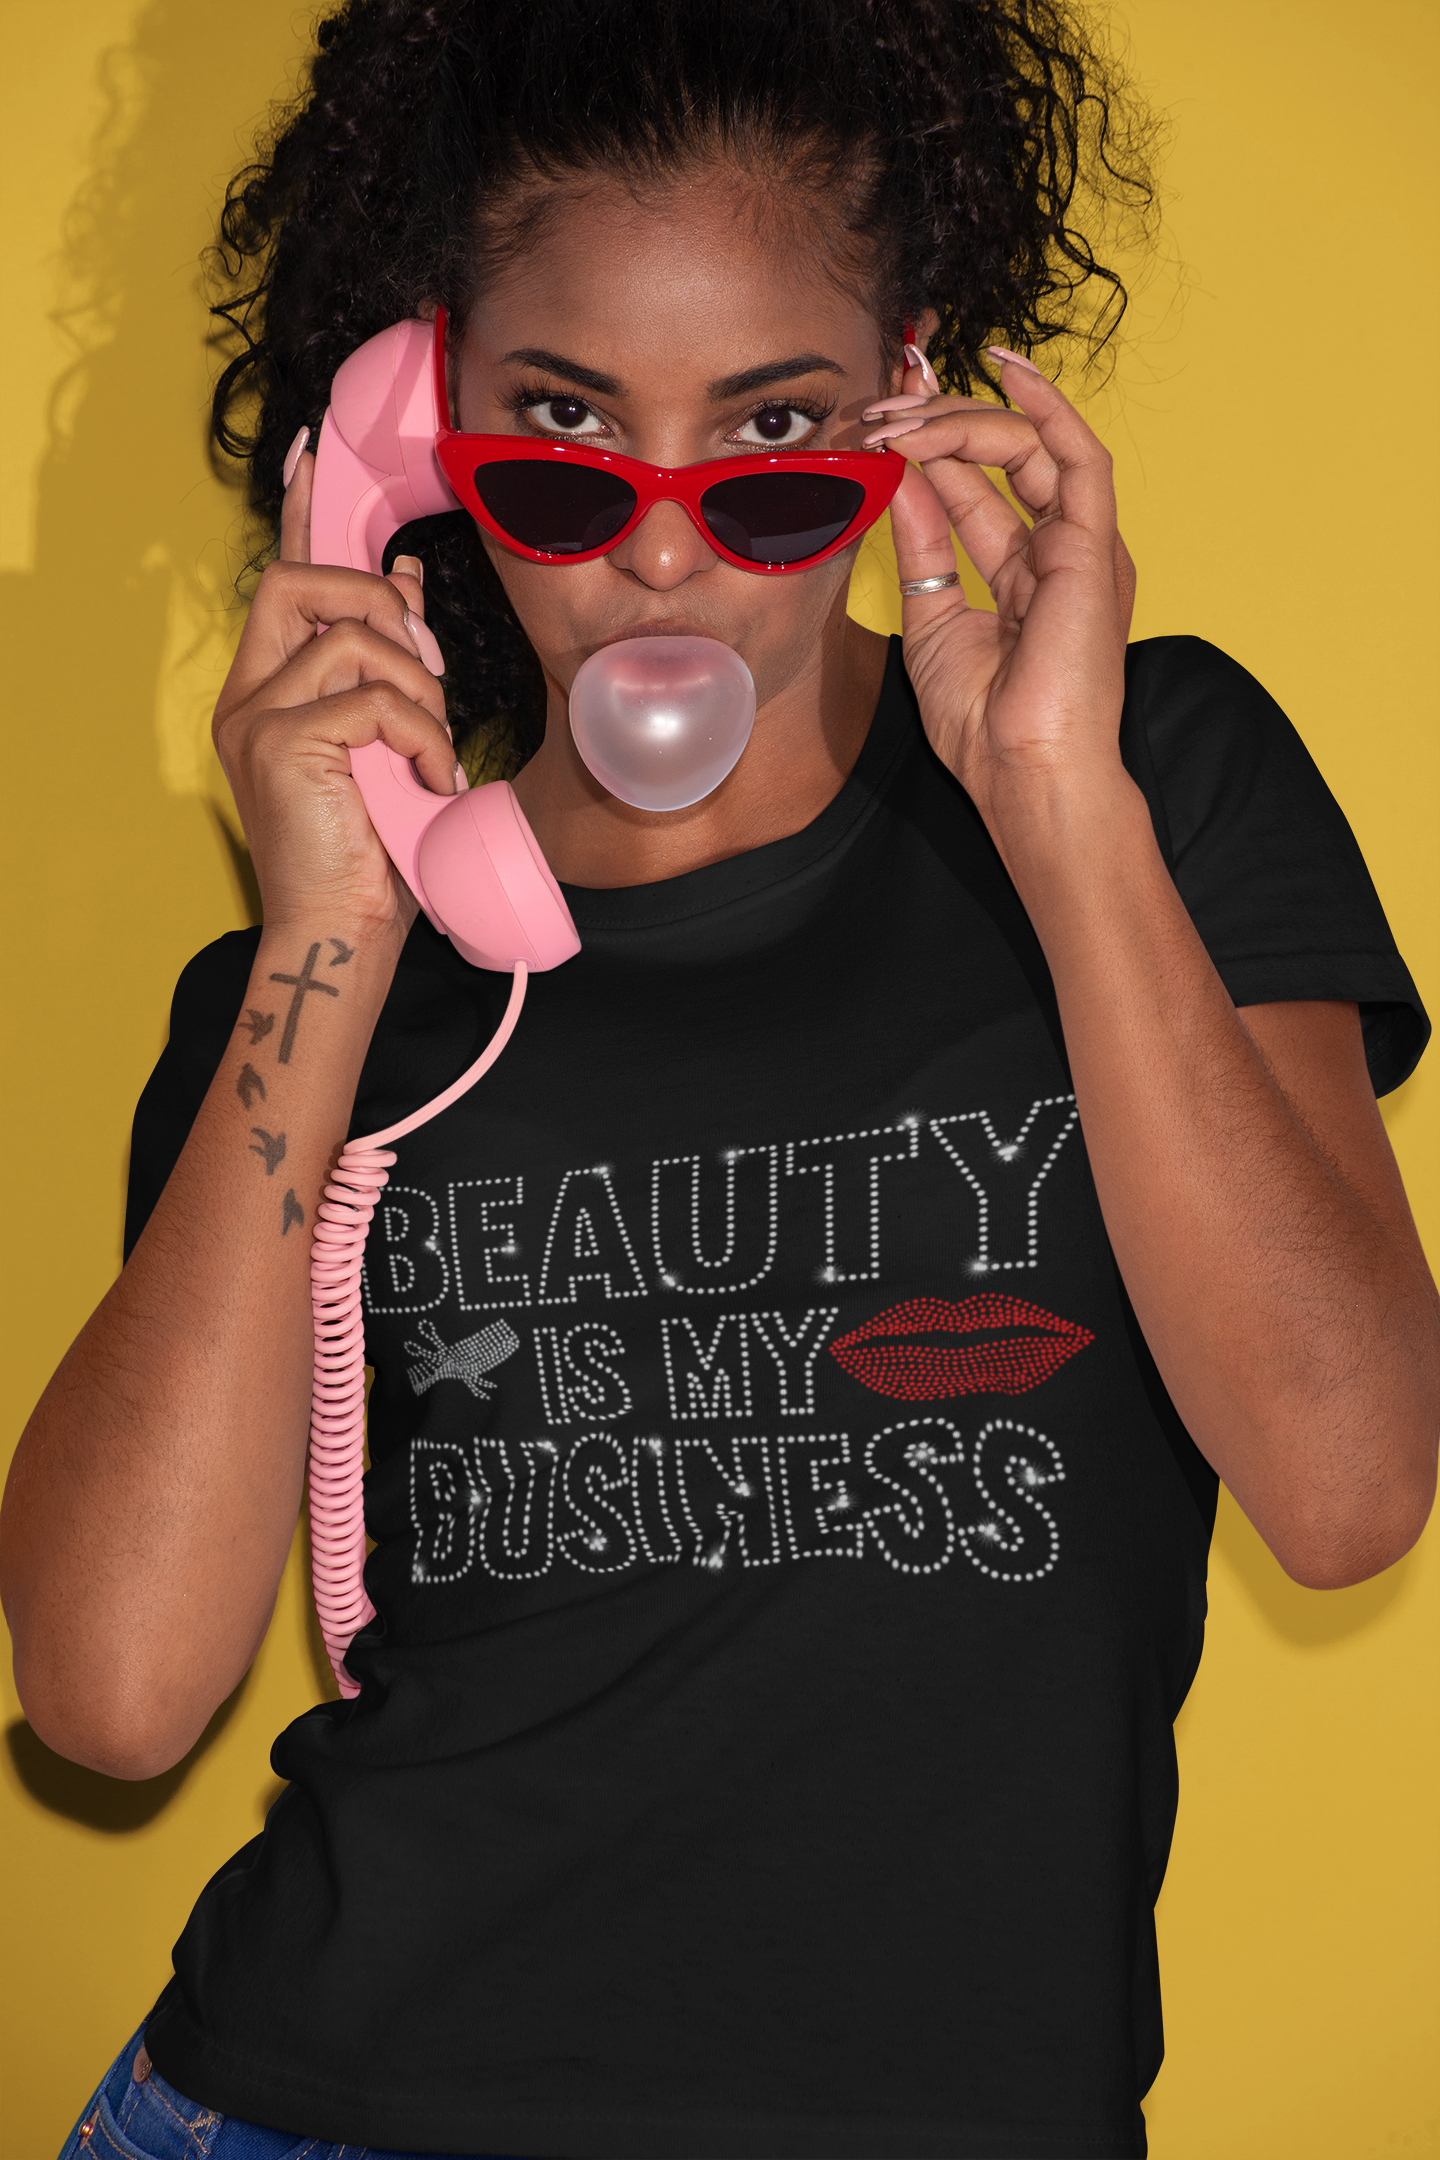 Beauty is My Business (bling) -T-Shirt